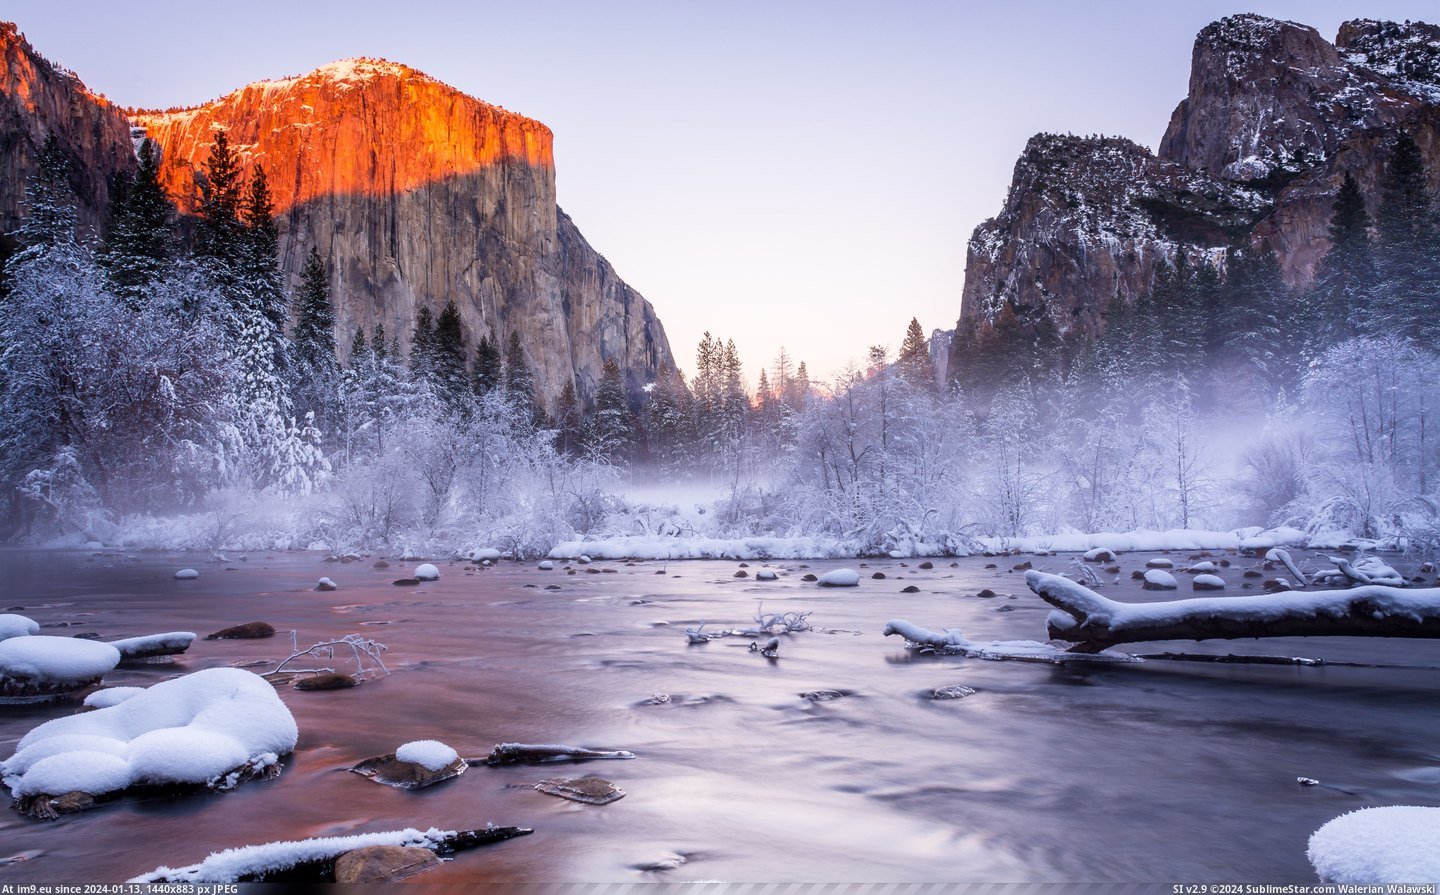 #Time #Valley #Covered #Snow #Yosemite [Earthporn] I've been to Yosemite, CA many time, but this is my first time seeing the snow covered valley.[5999x3691] Pic. (Изображение из альбом My r/EARTHPORN favs))